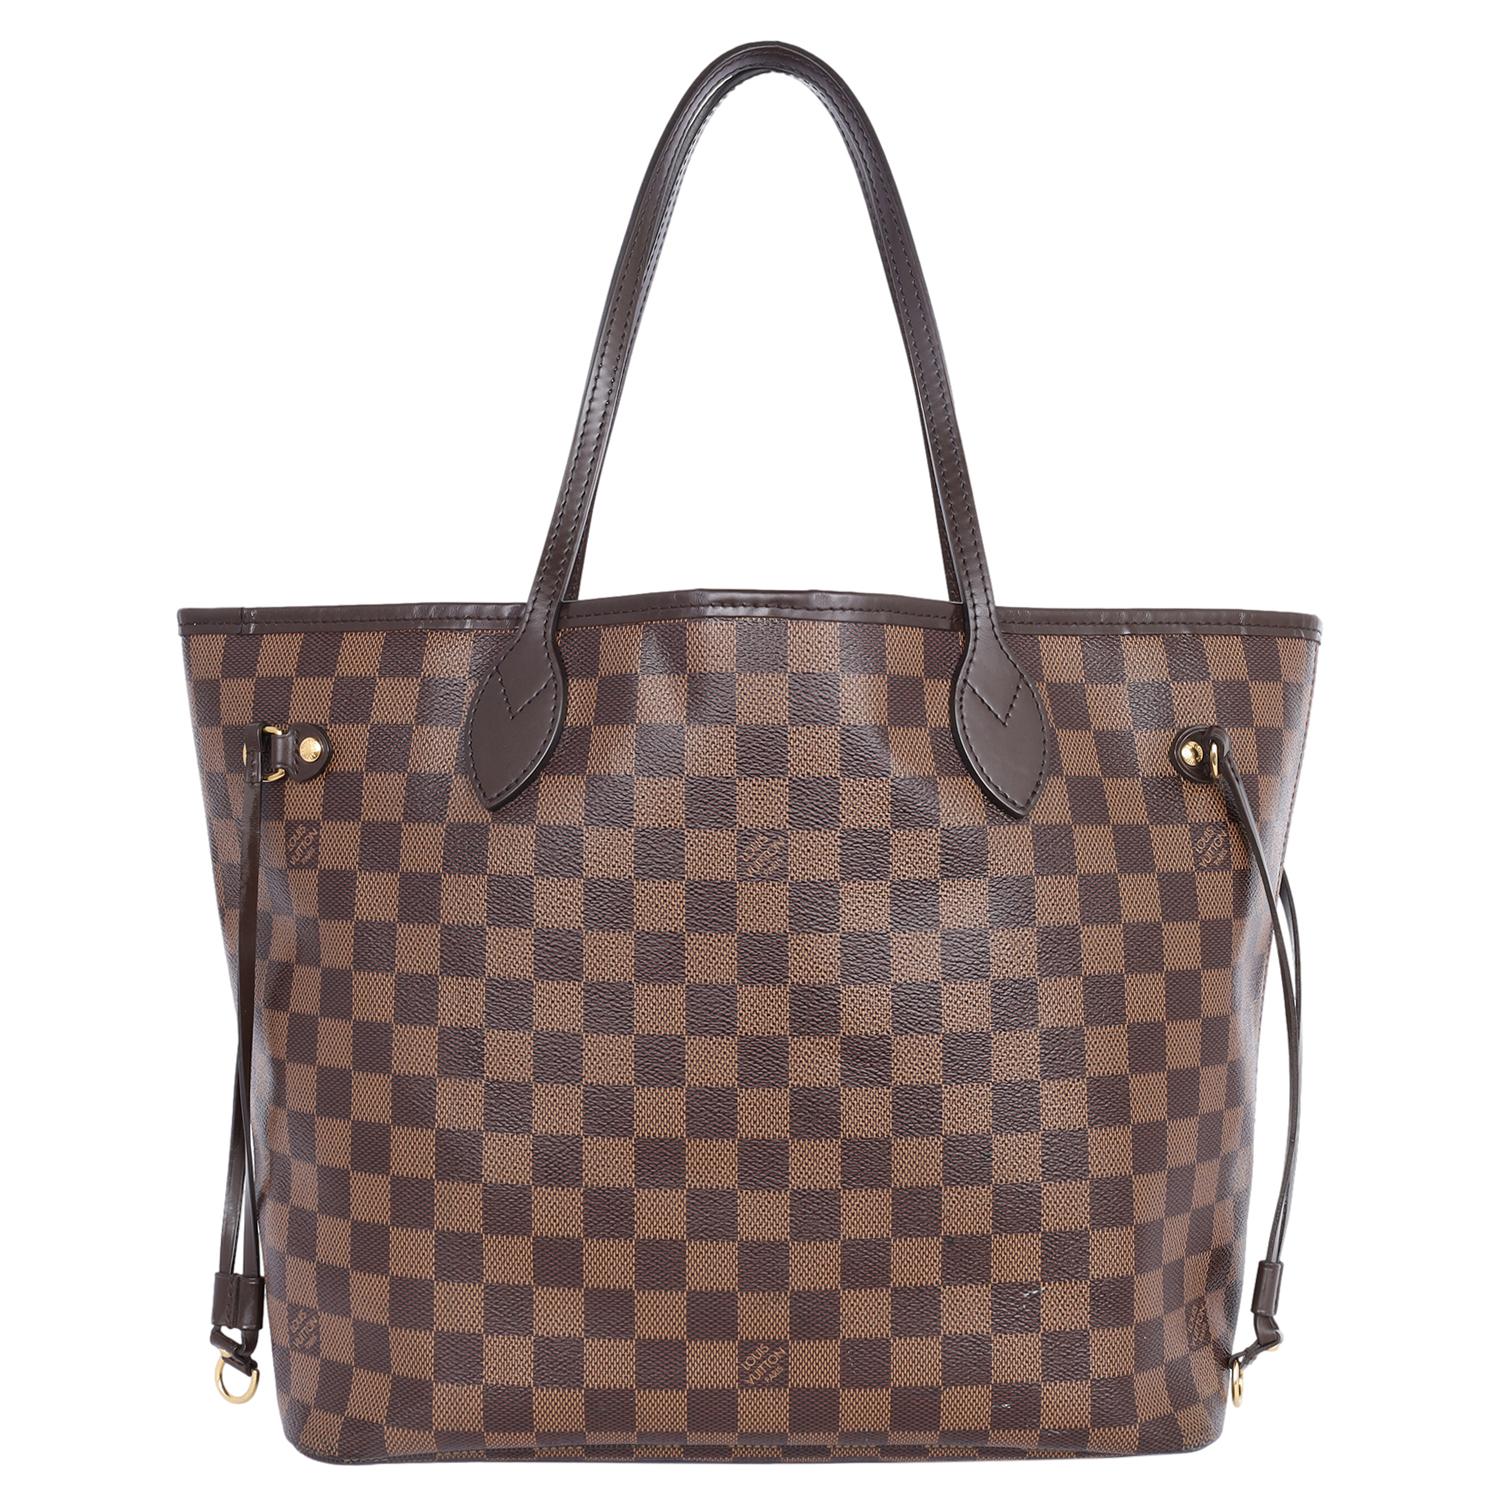 Authentic, pre-loved Louis Vuitton Brown Damier Ebene Neverfull MM tote. This stylish tote is crafted of classic Louis Vuitton canvas. Features complimentary leather shoulder straps, trim, side cinch cords, and polished brass hardware. The wide top